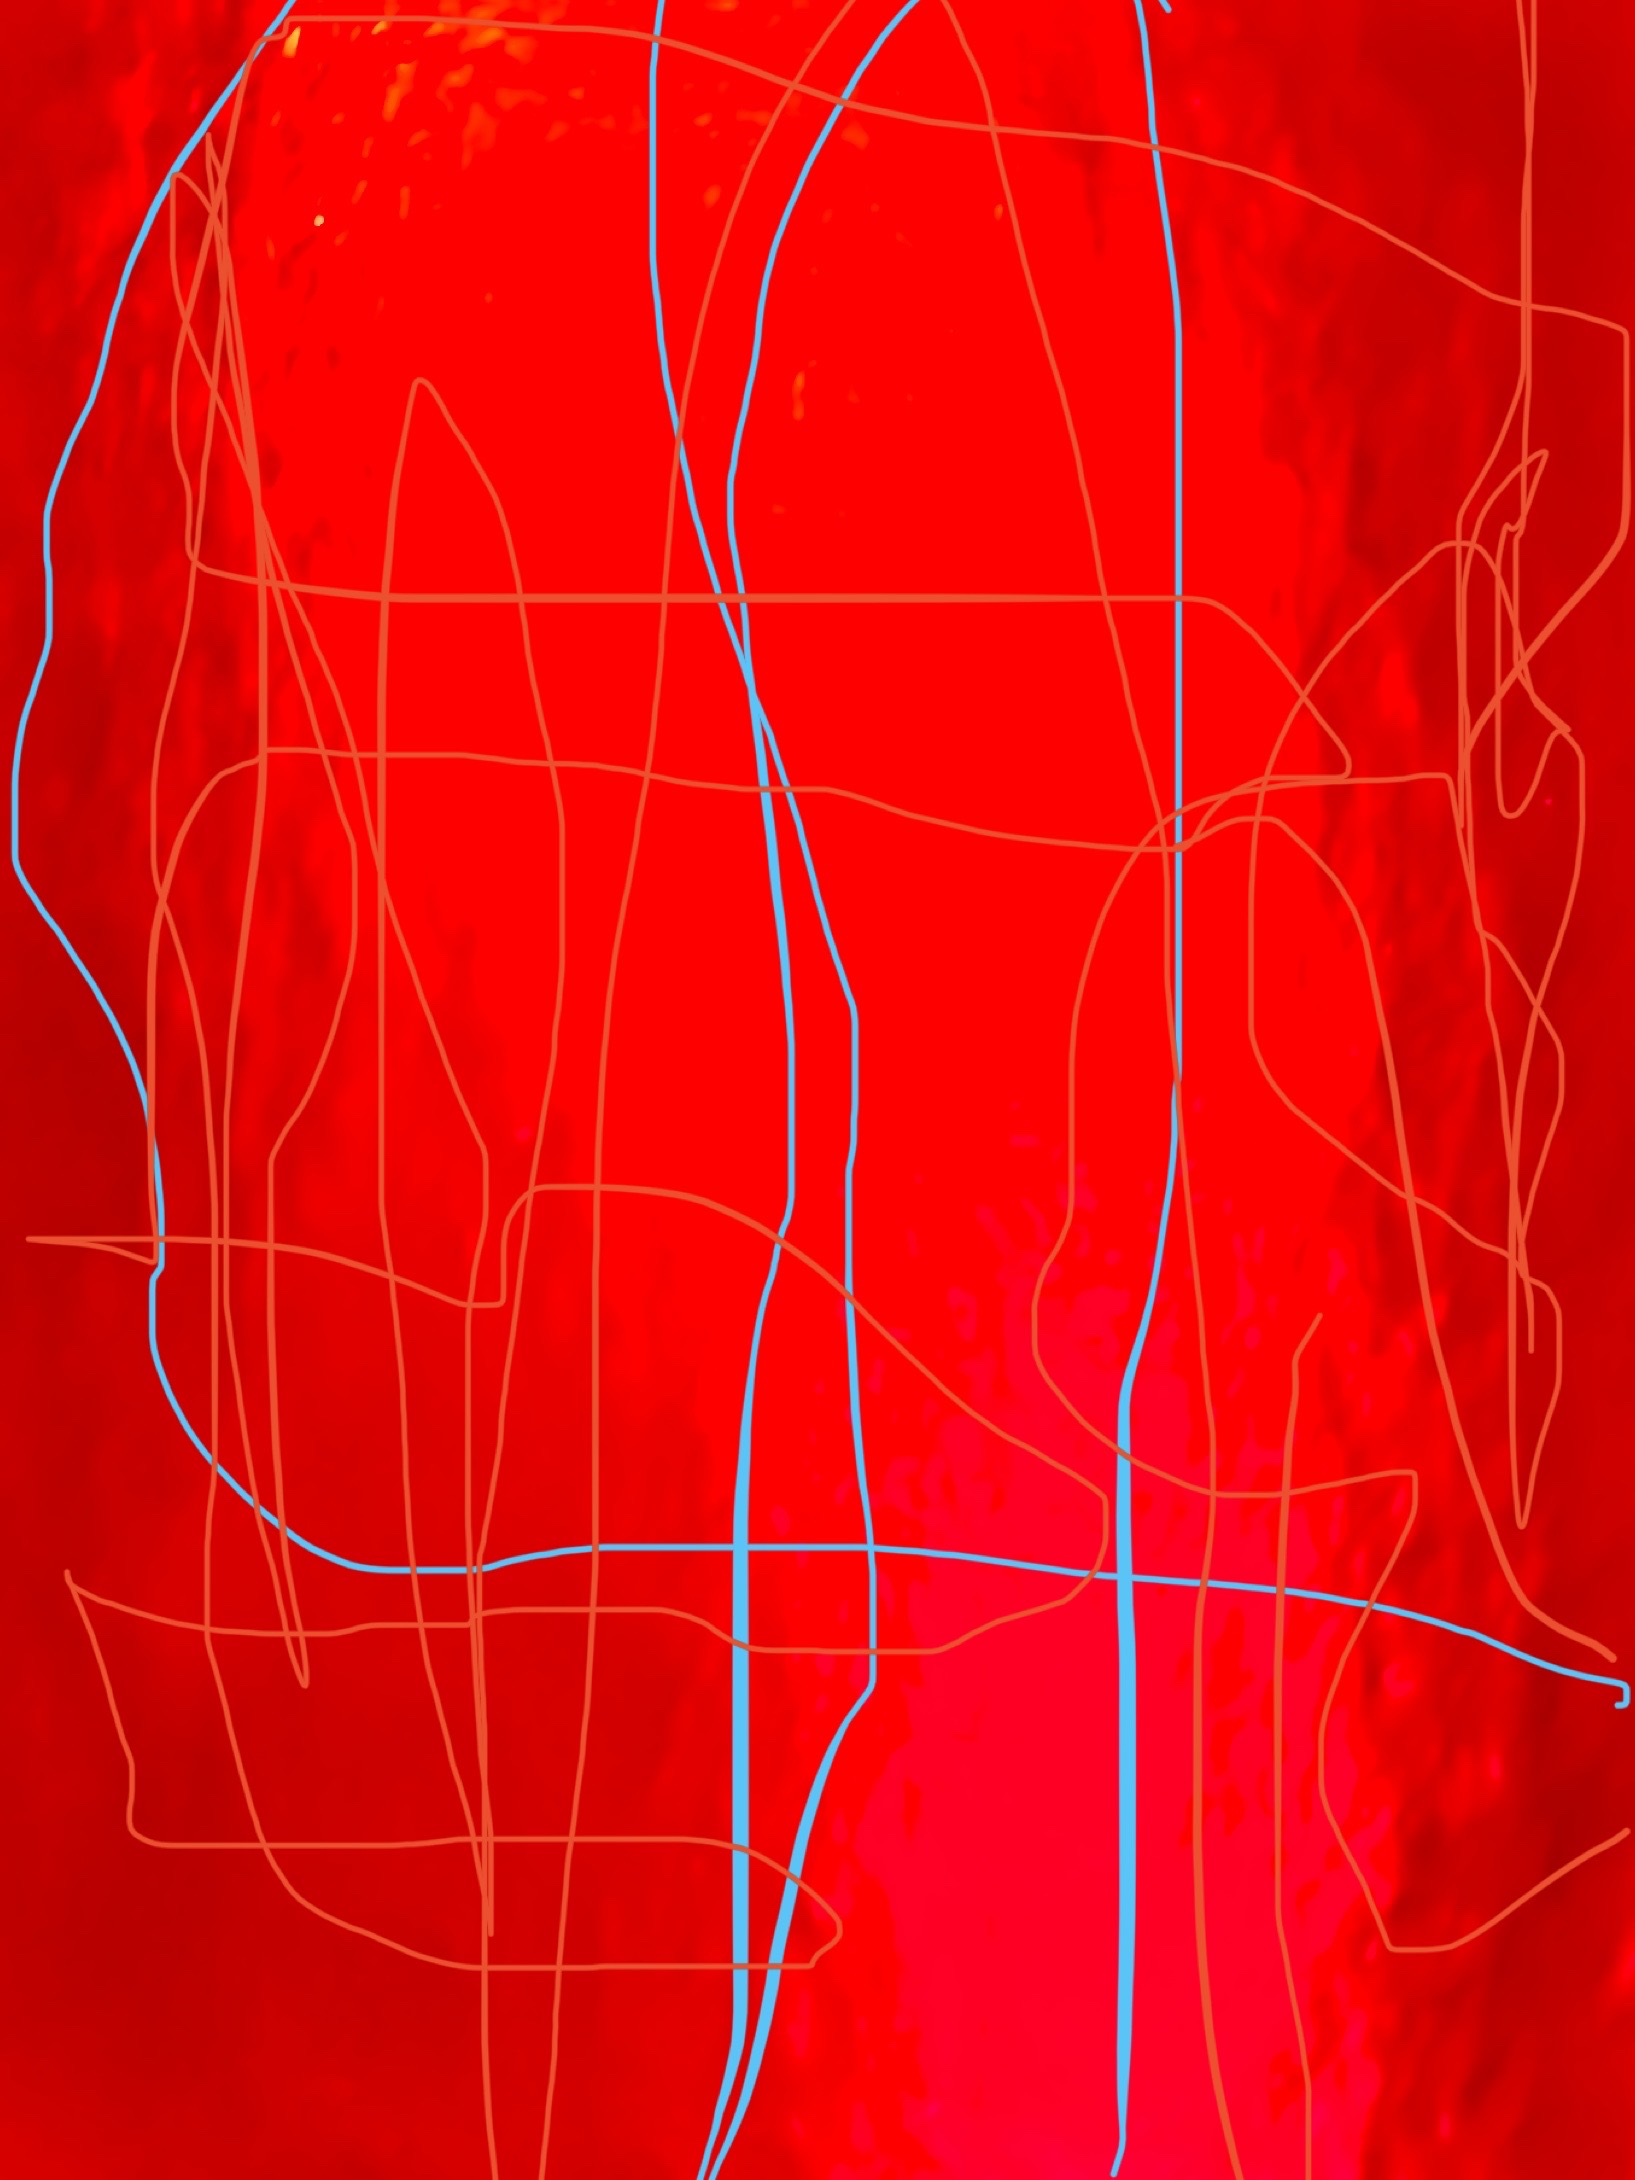 Lines of Blue & Red